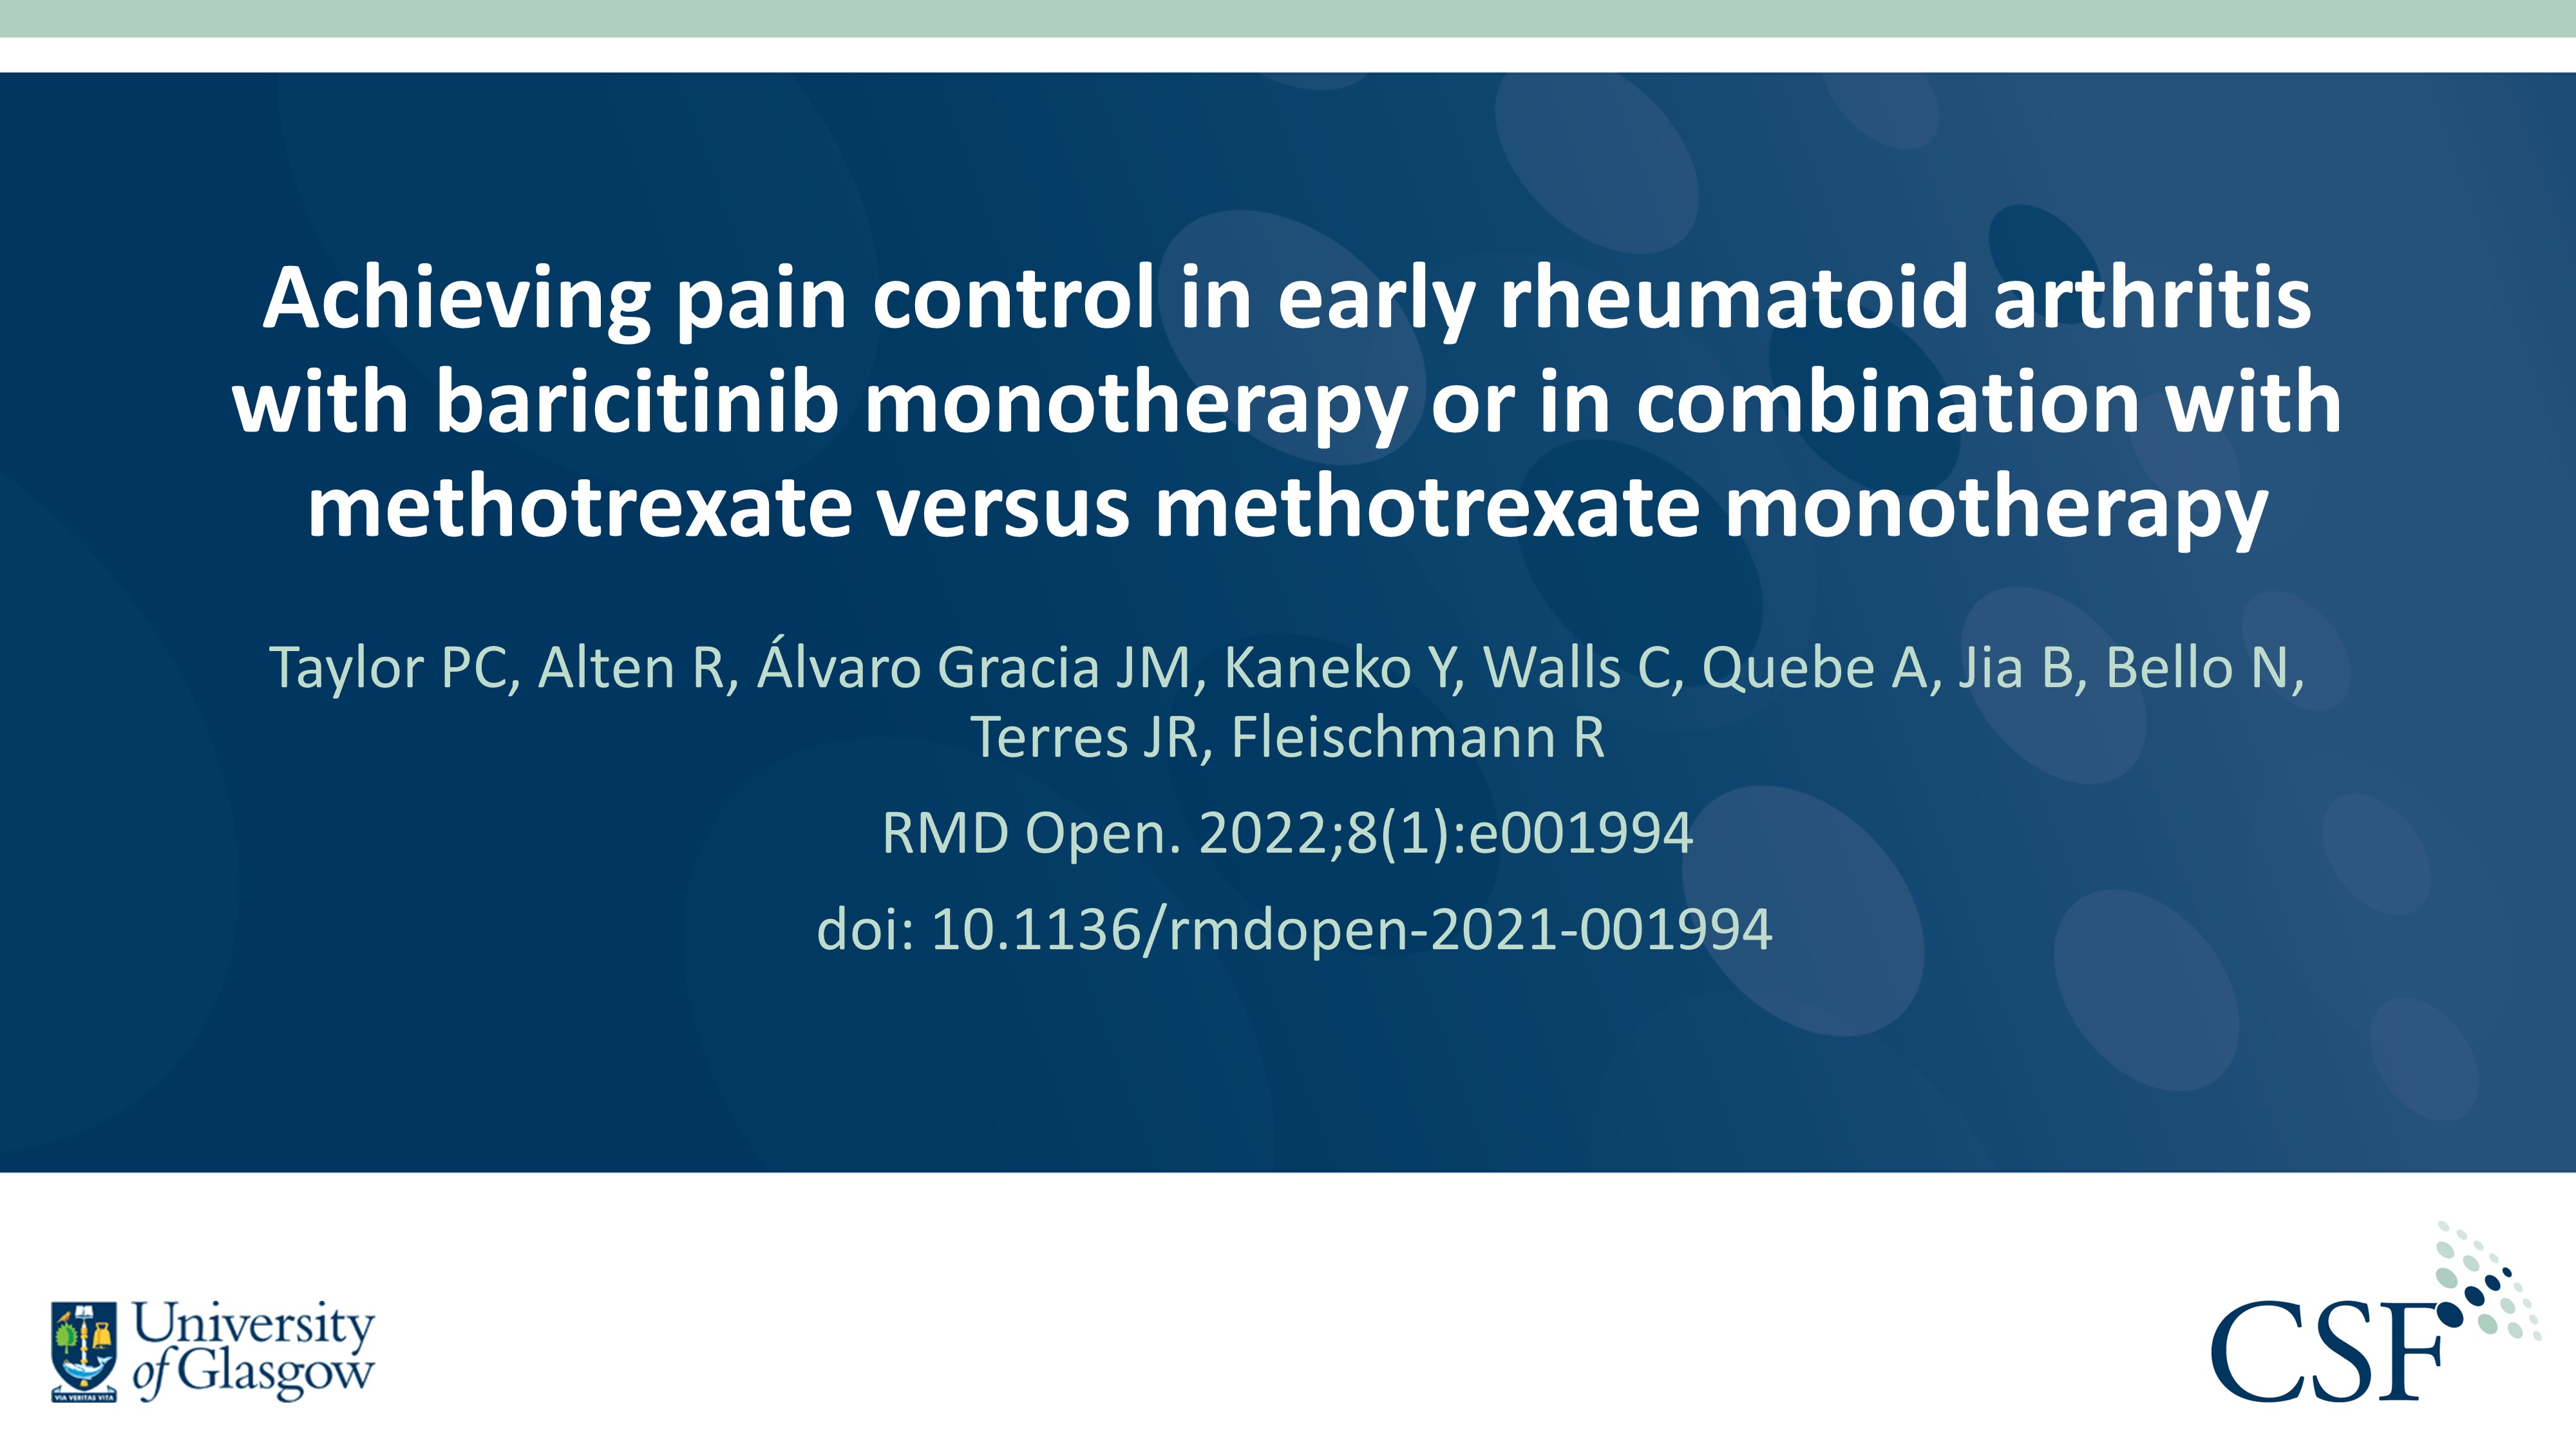 Publication thumbnail: Achieving pain control in early rheumatoid arthritis with baricitinib monotherapy or in combination with methotrexate versus methotrexate monotherapy